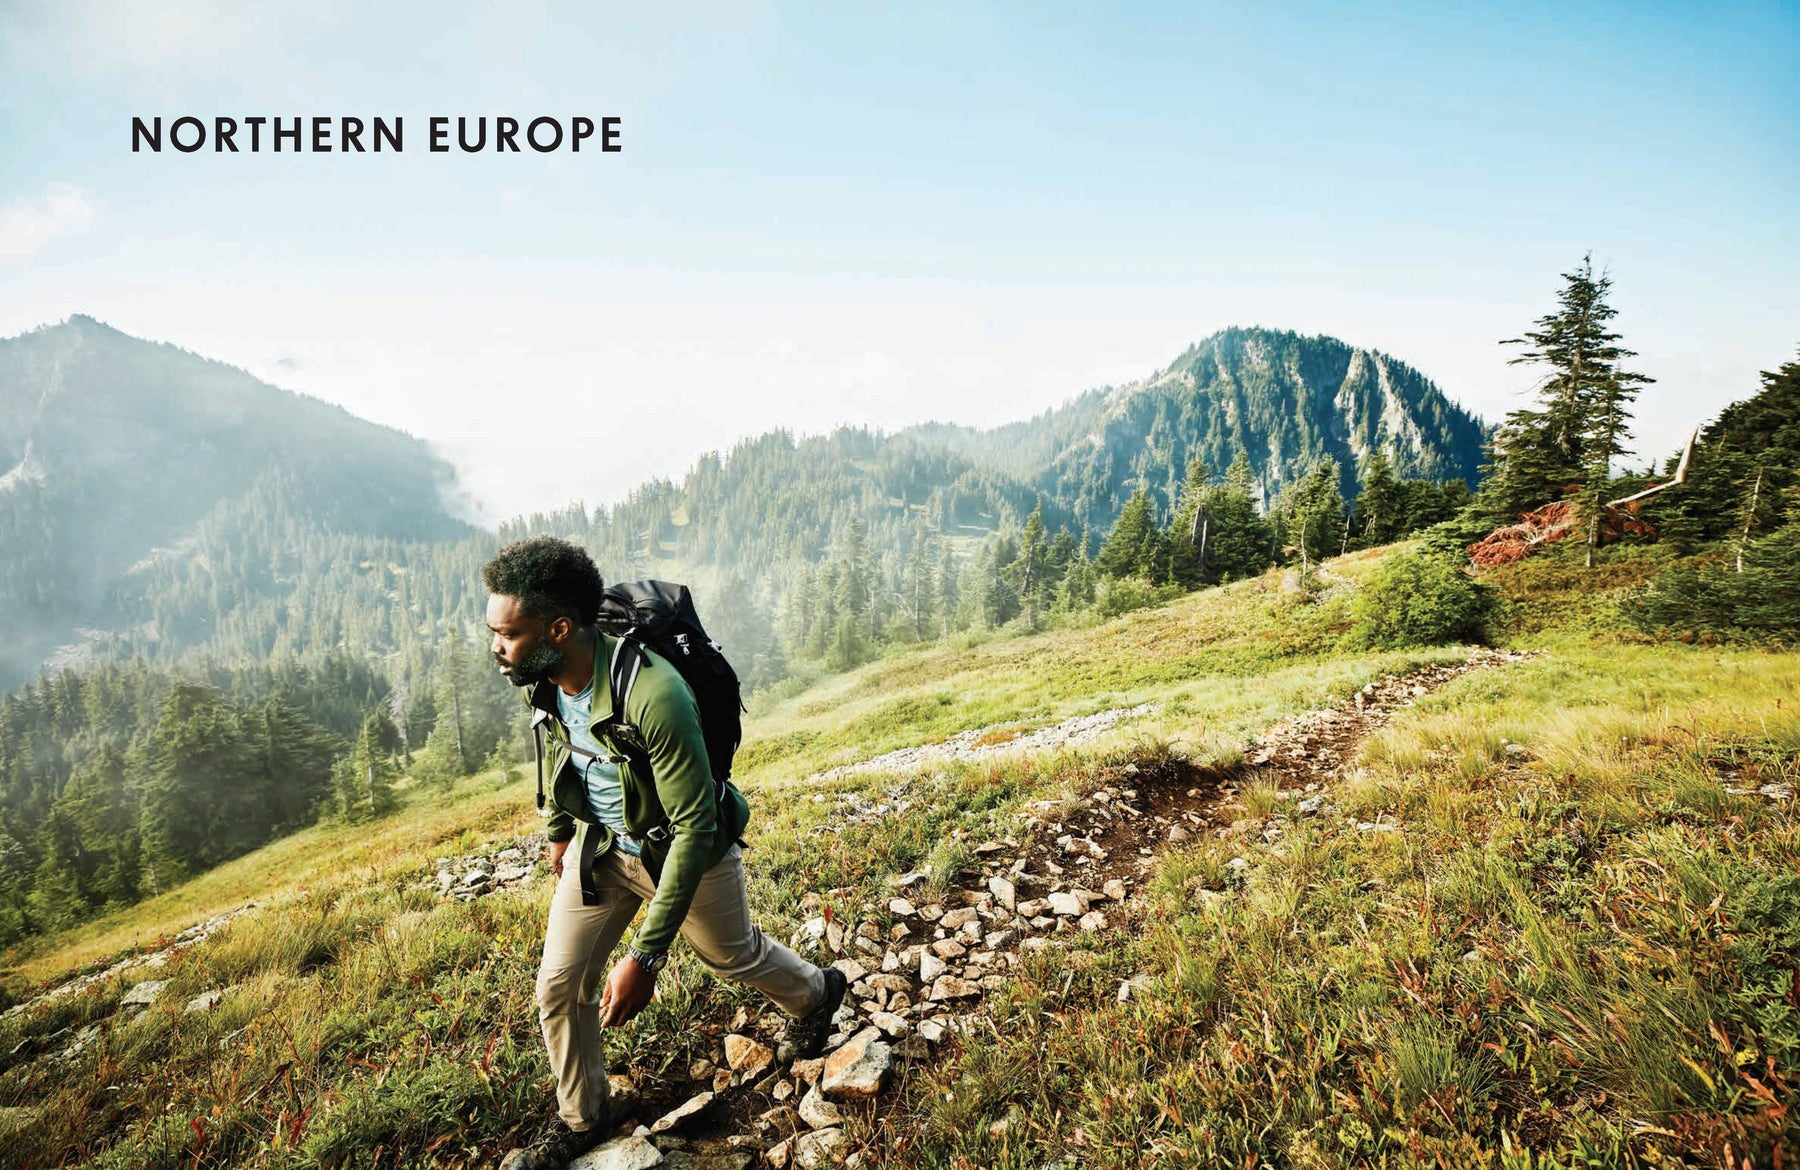 Epic Hikes of Europe - Book + eBook